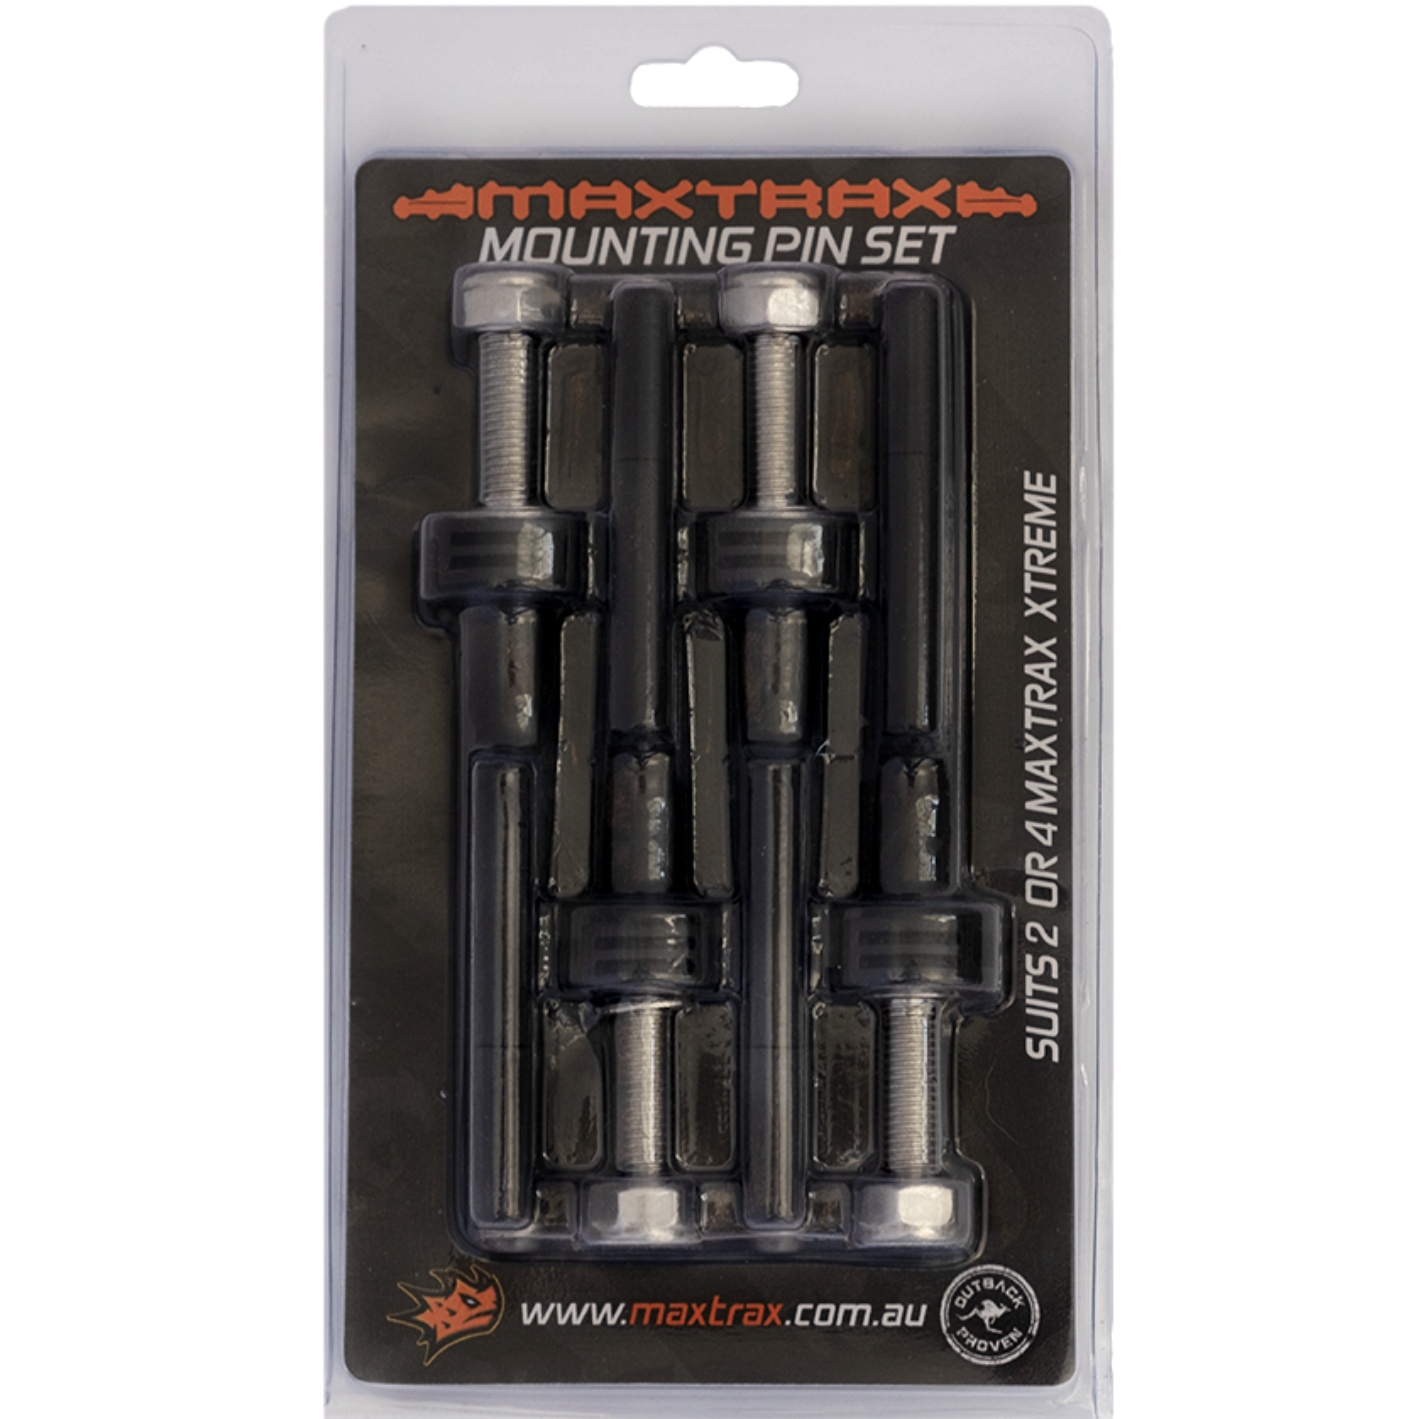 MAXTRAX Mounting Pin Set 40mm - Holds 2x MK2 or Xtreme